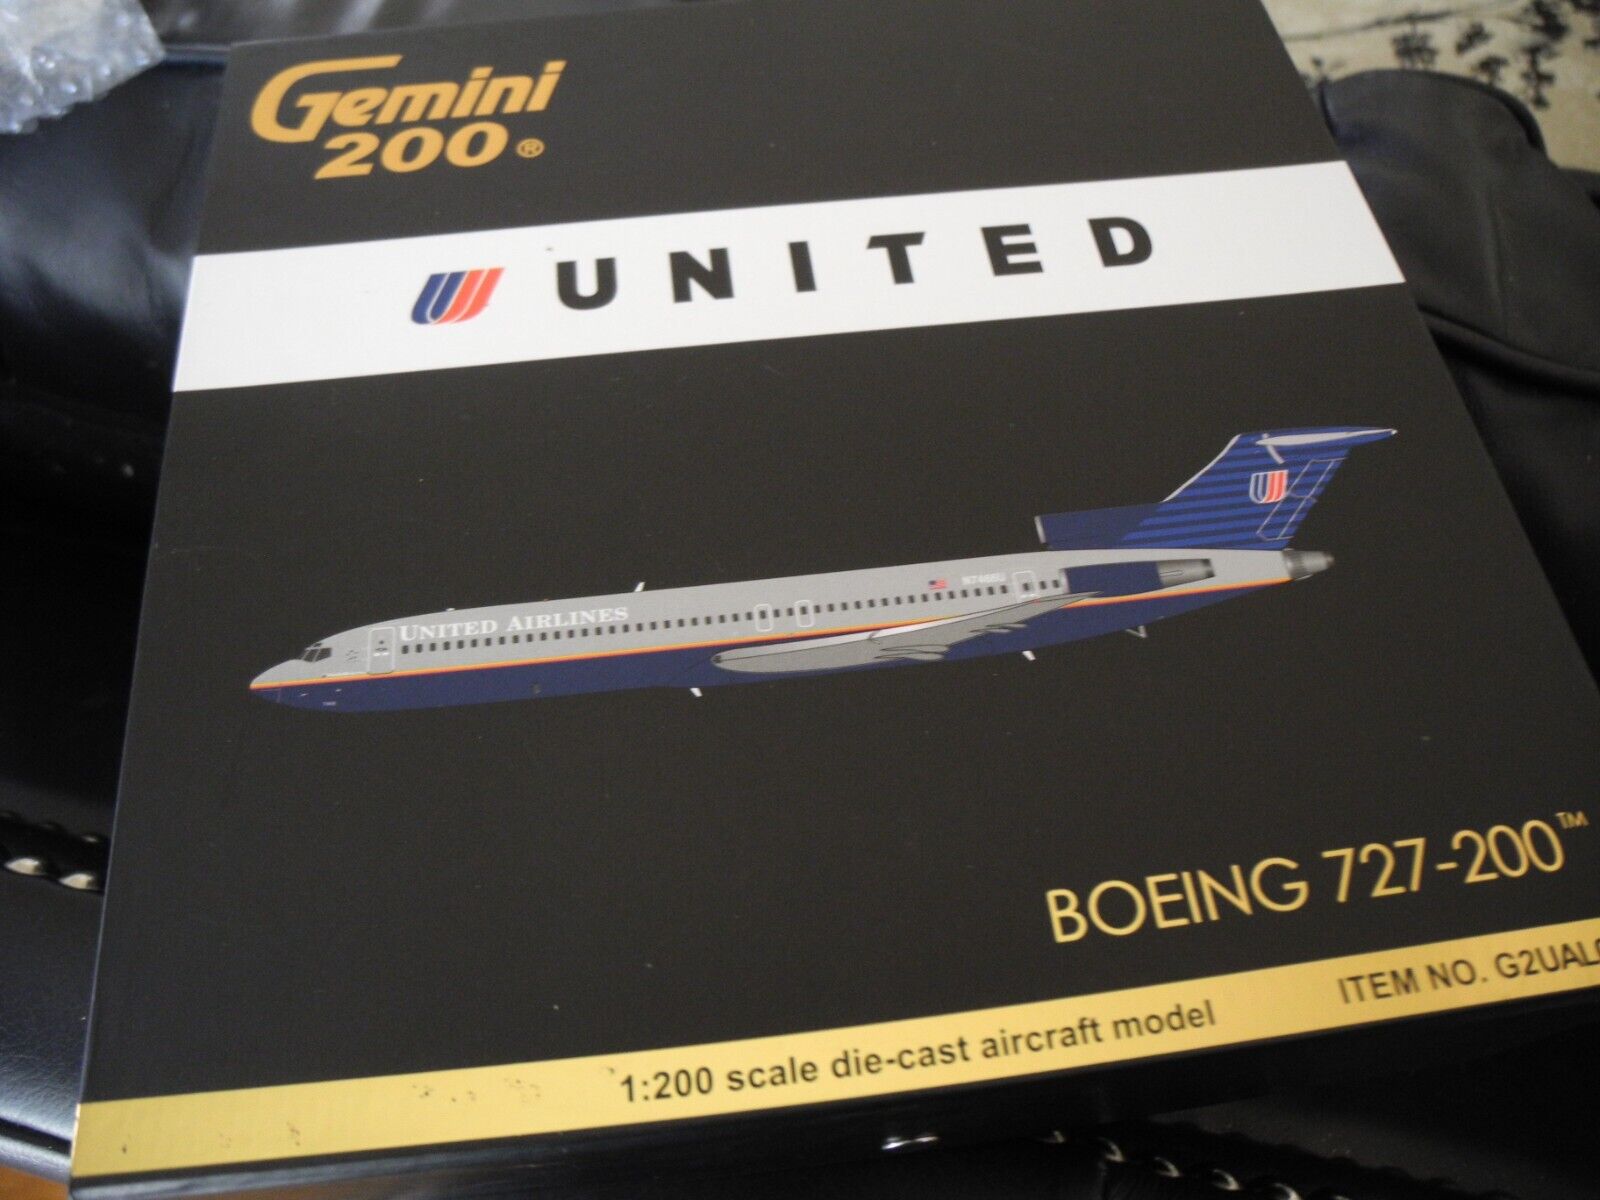 Extremely RARE GEMINI Jets Boeing 727-200 UNITED, 1:200, 1st Version, Limited